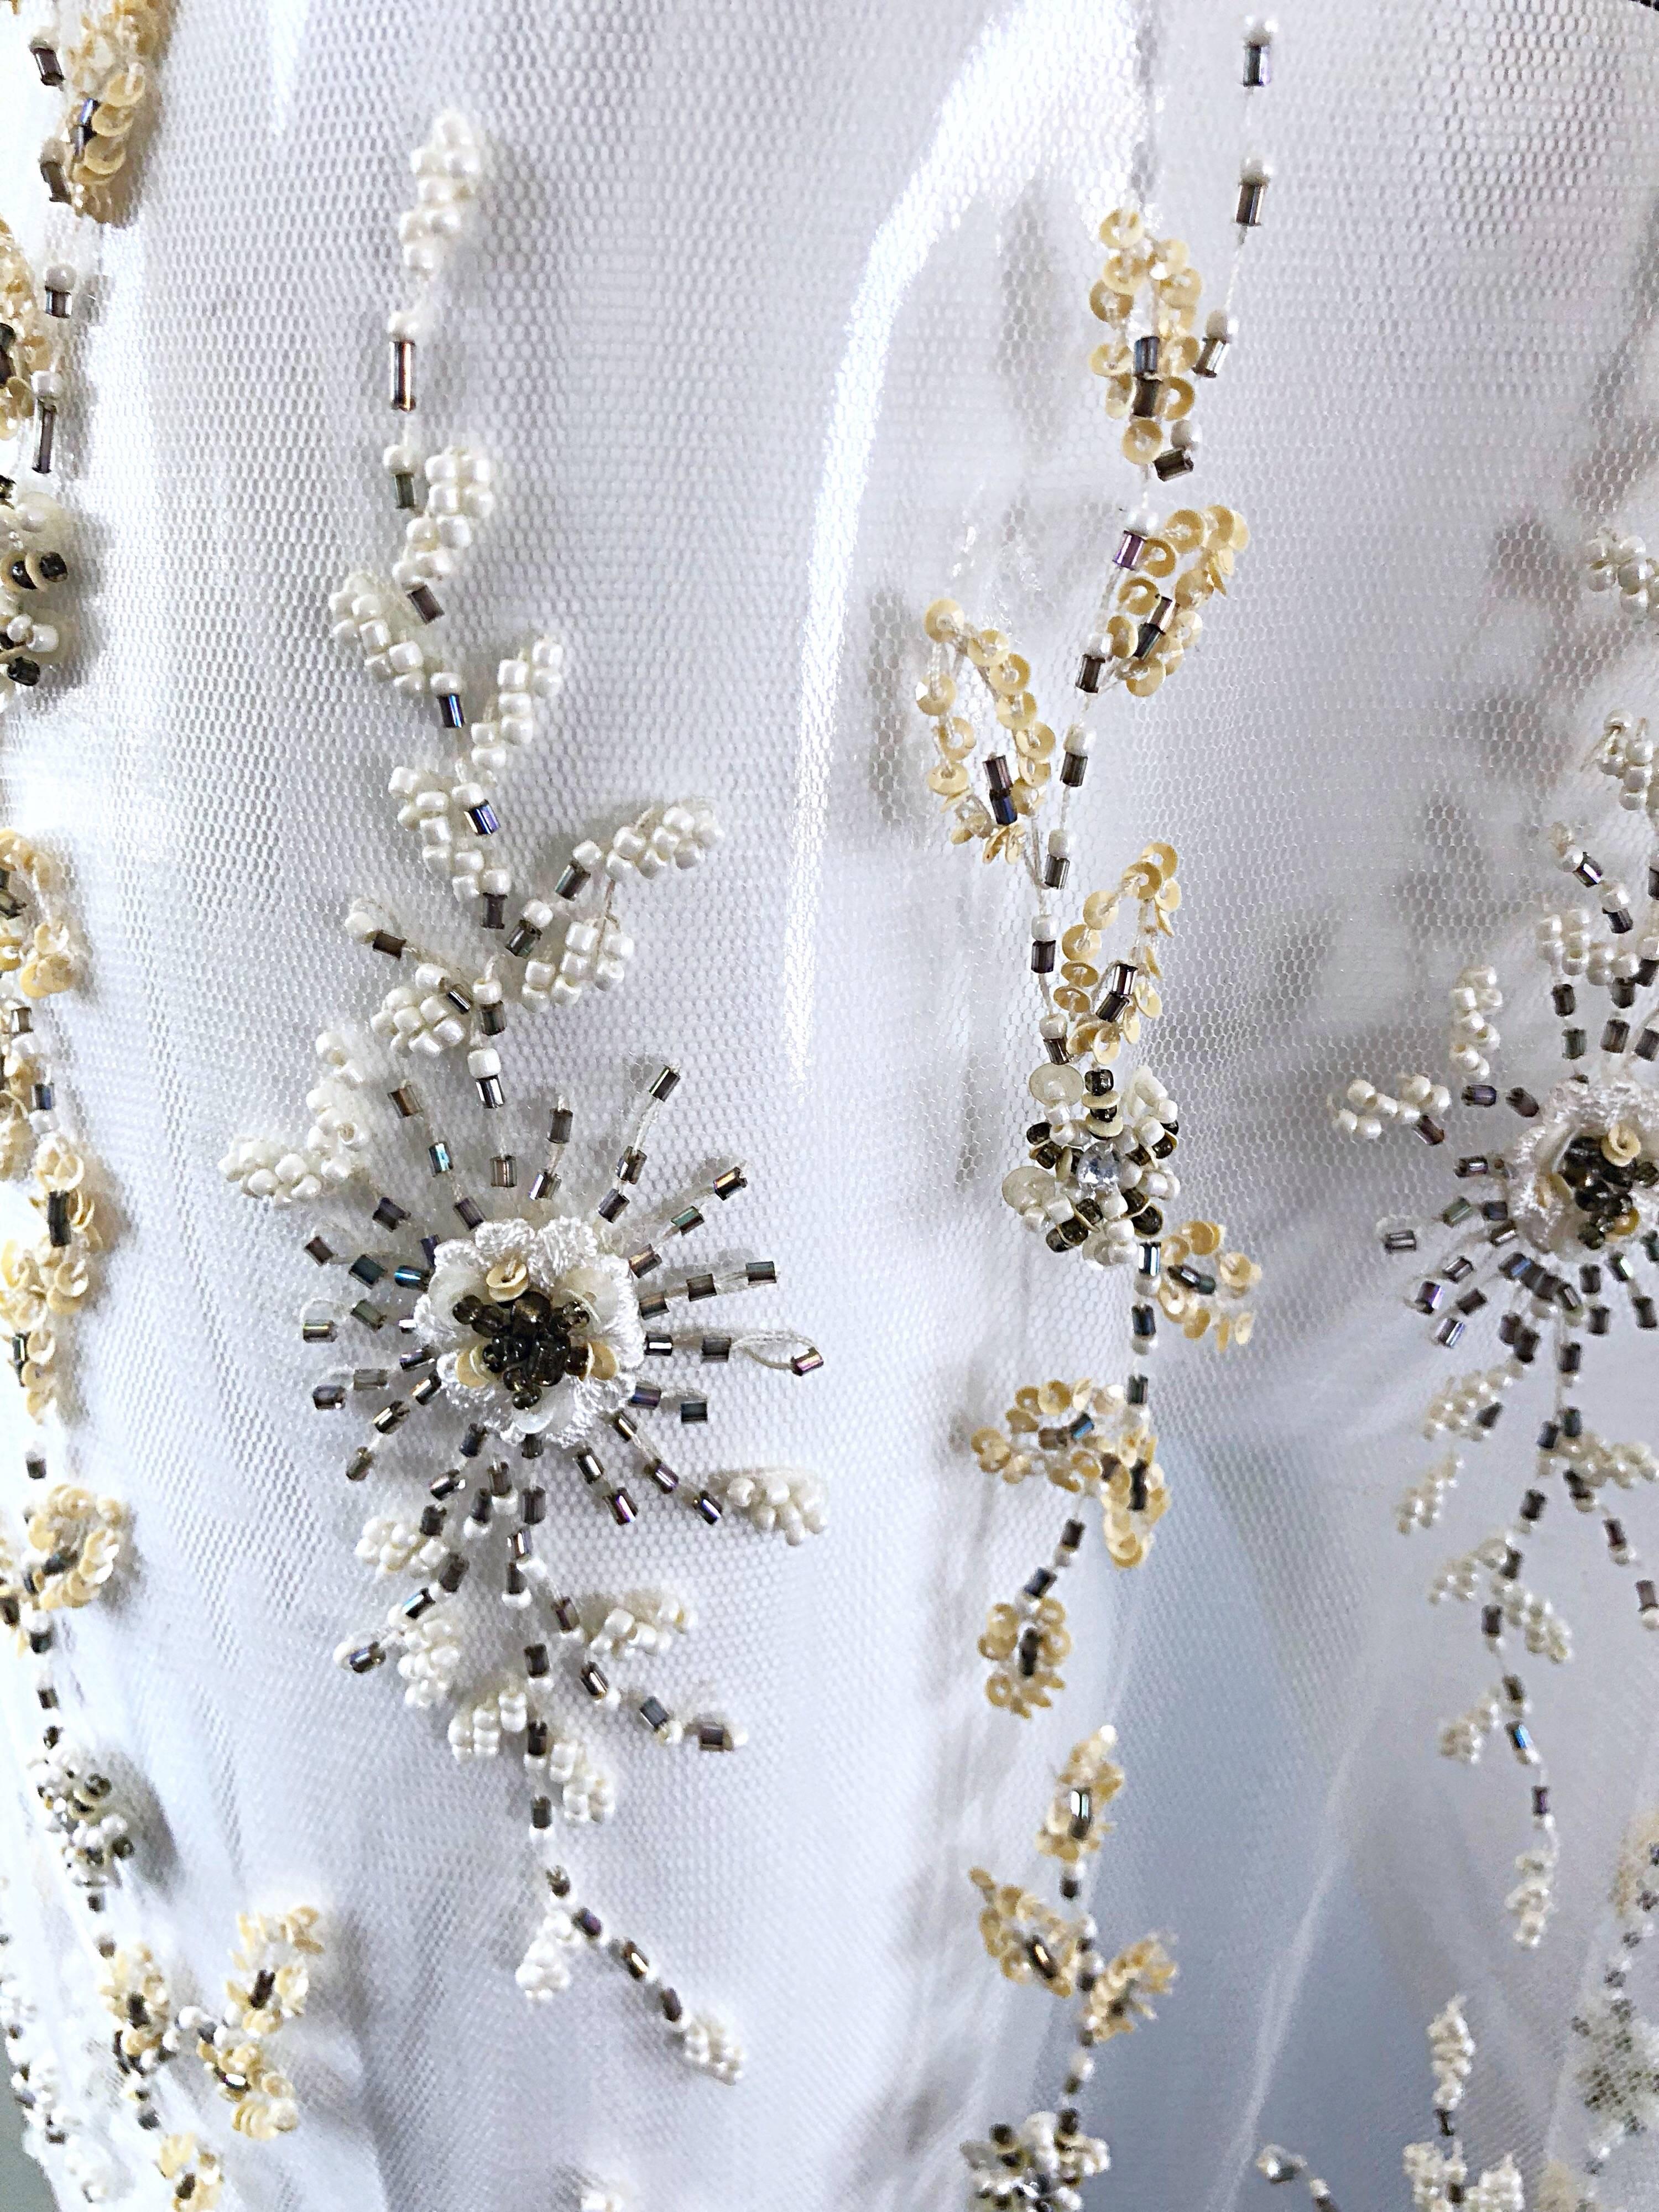 Beautiful vintage white sheer oversized piano shawl / scarf! Feature thousands of hand-sewn pearl, beads, rhinestones and sequins. Pearl tassels feature pink iridescent pailliettes on the ends. Can be worn a number of ways, and would look fantastic